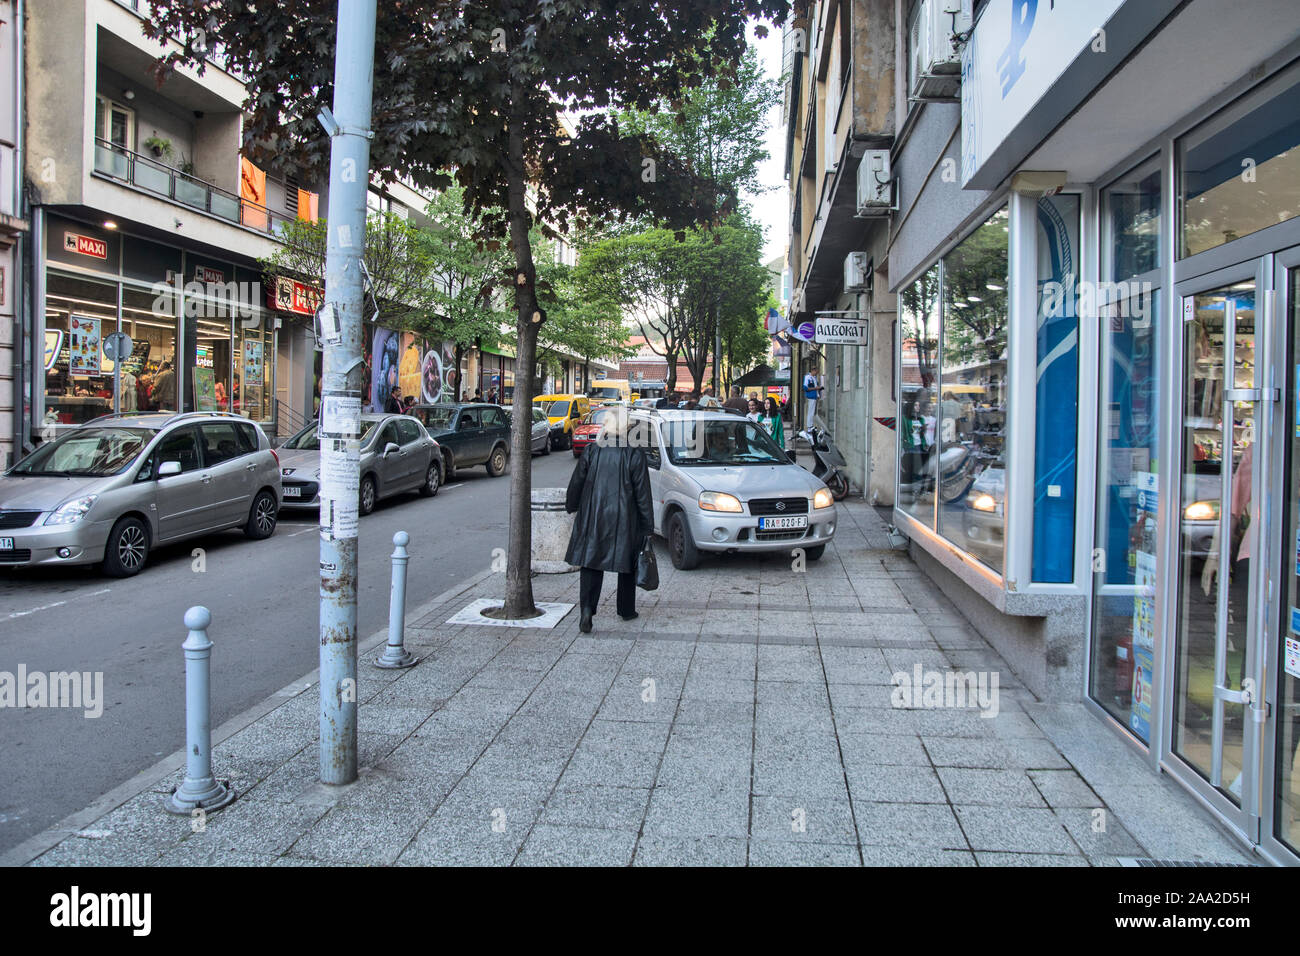 Raska, Serbia, May 03, 2019. One of the main downtown's main streets, shops and walkers. Stock Photo